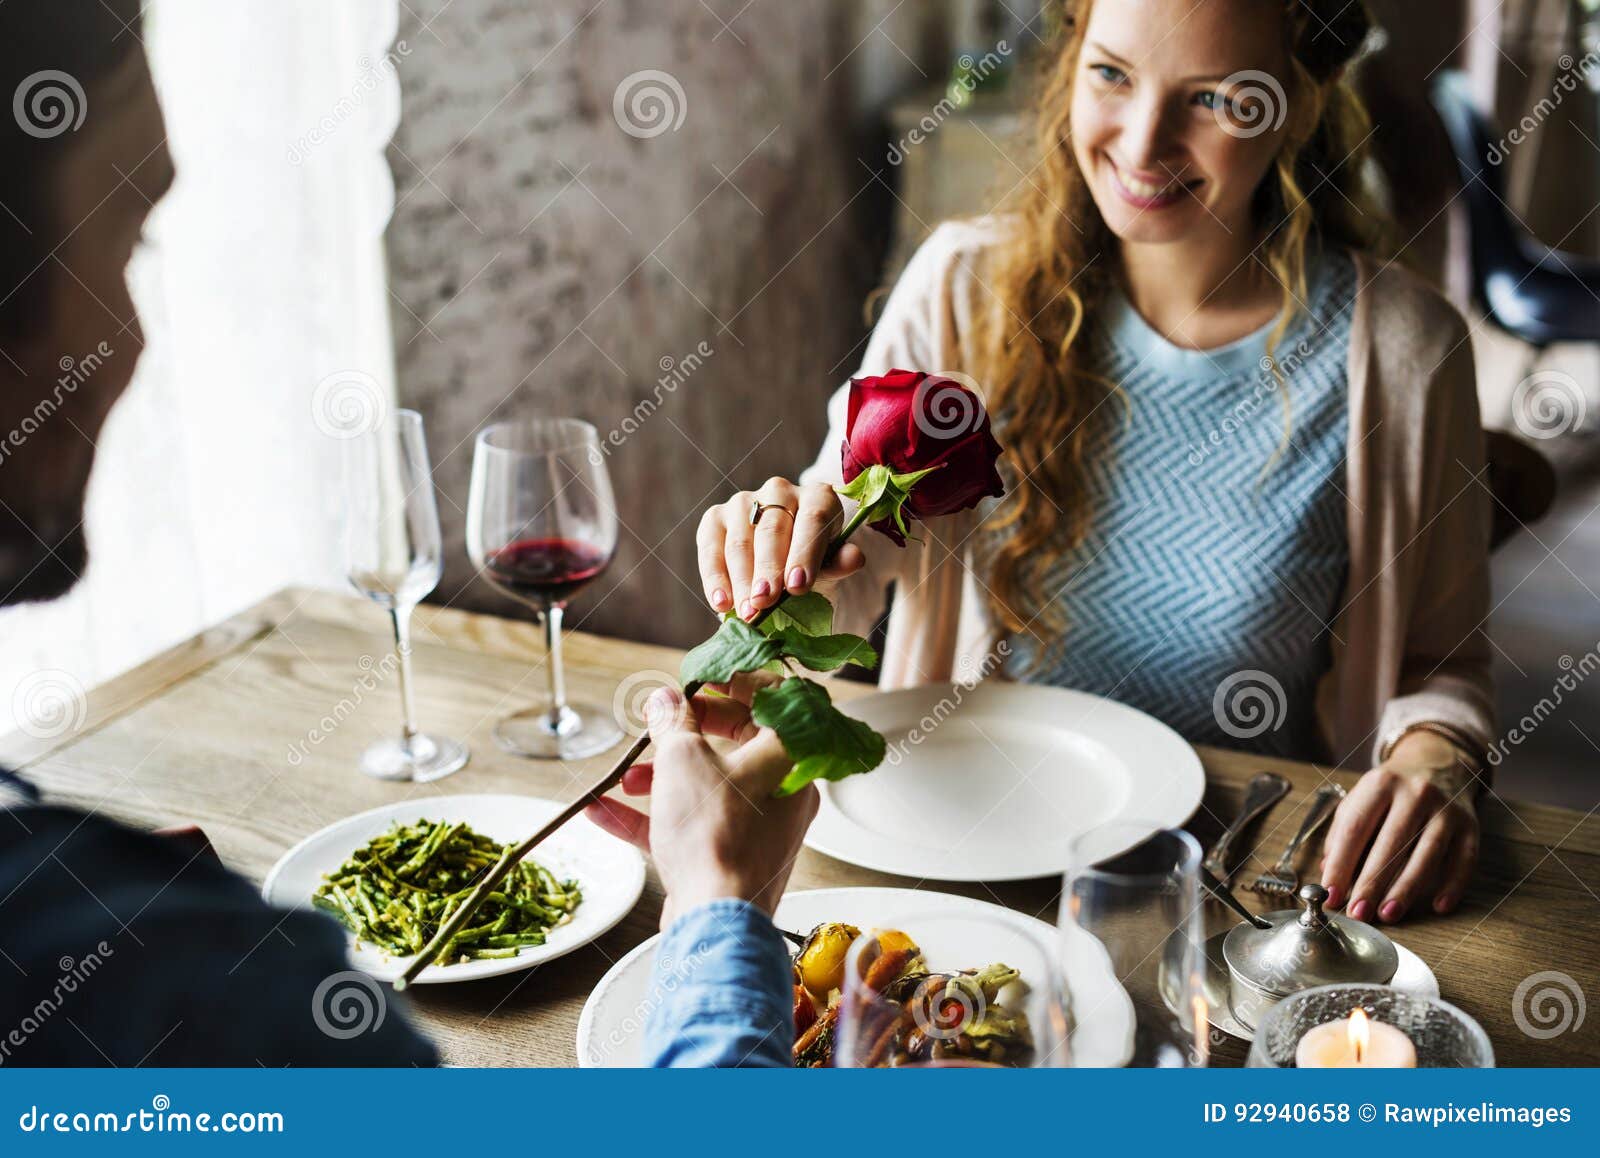 romantic man giving a rose to woman on a date